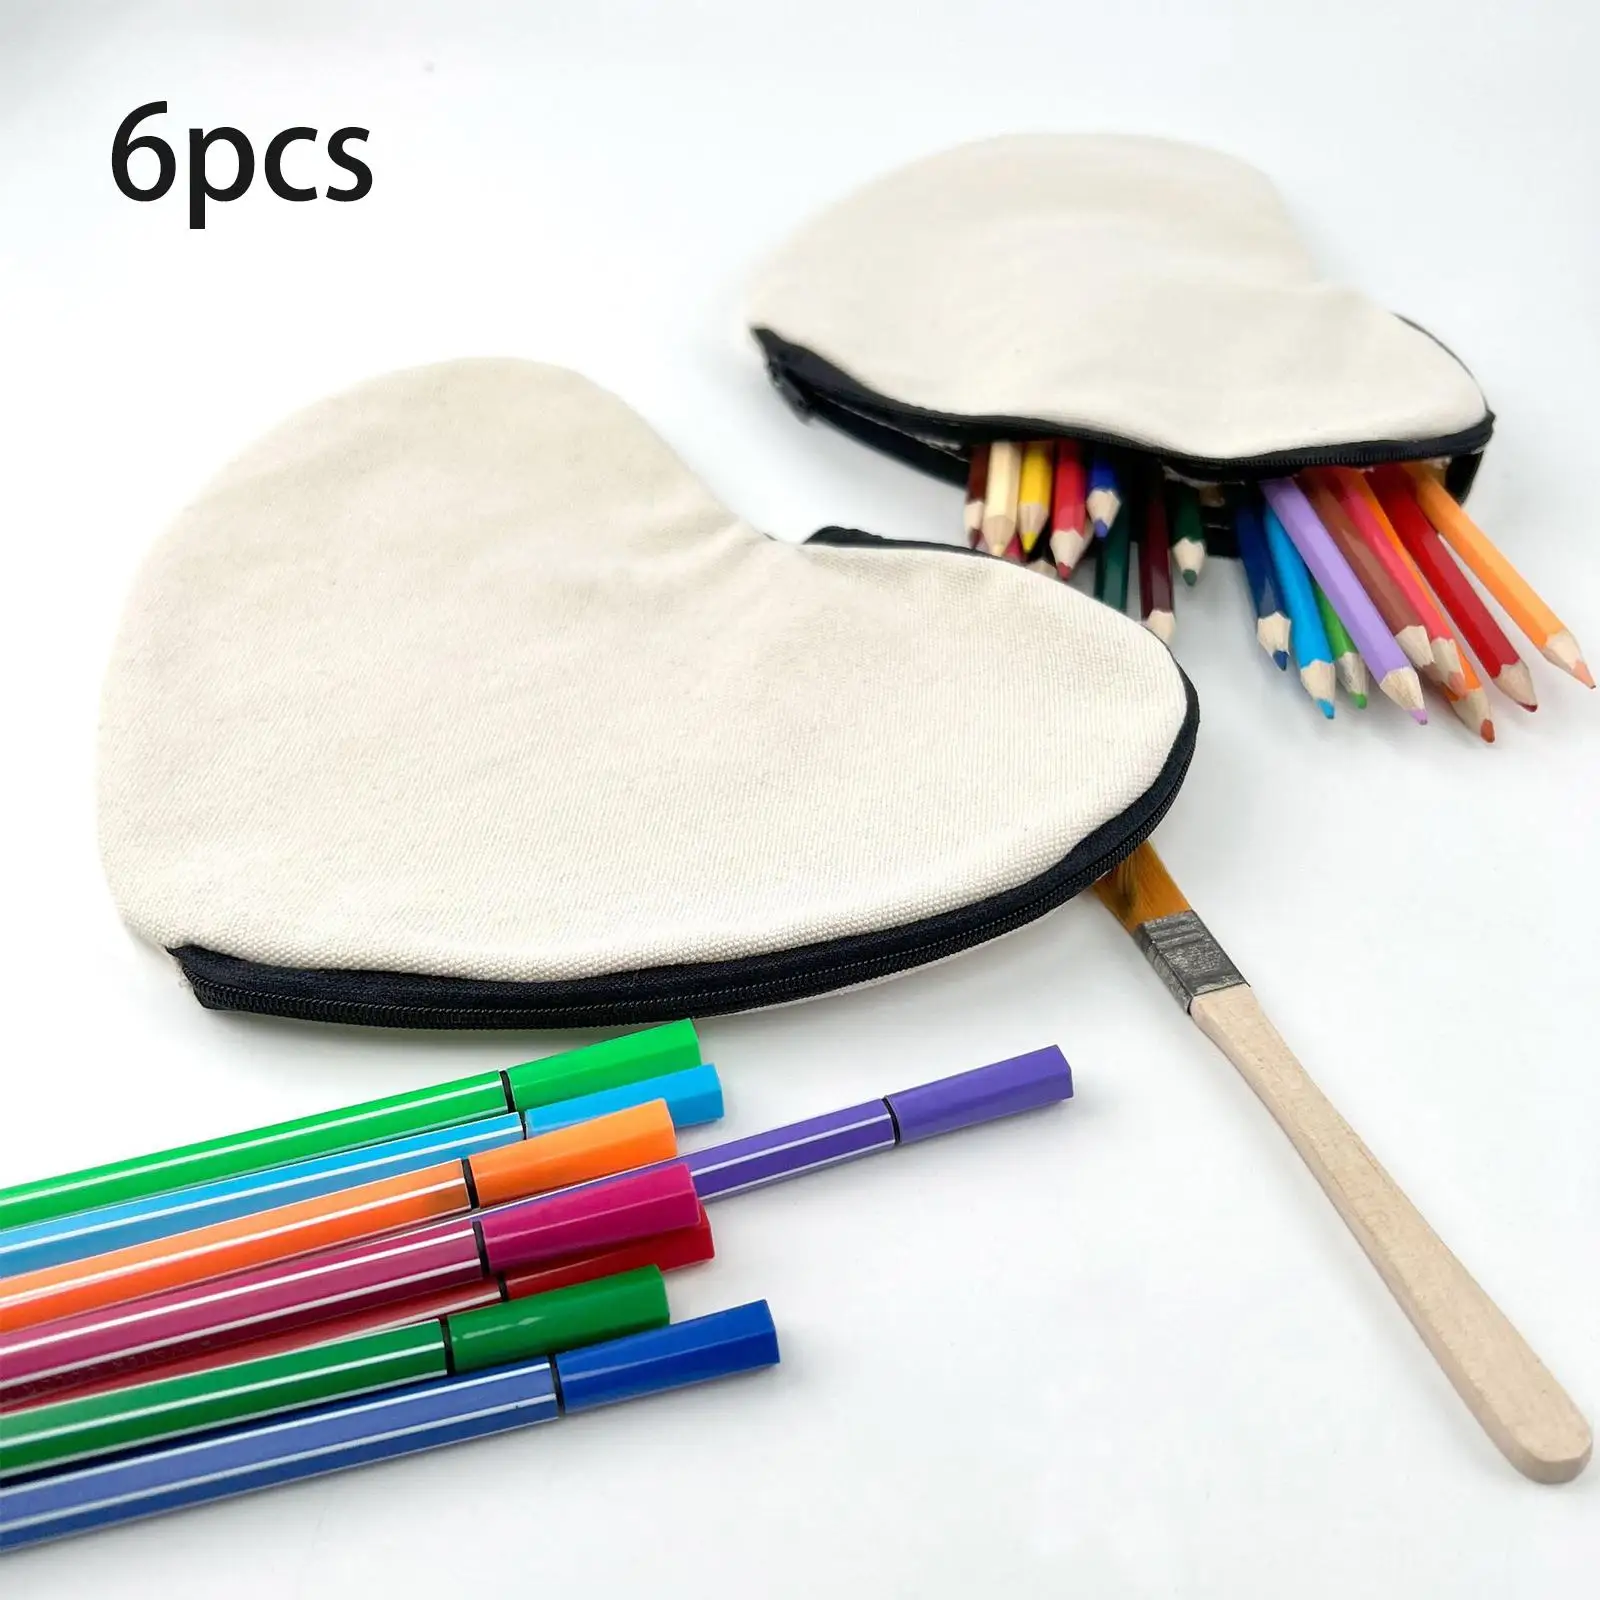 6Pcs Blank DIY Craft Bags Canvas Pen Case Travel Makeup Pouches for Toiletry Stationery Storage